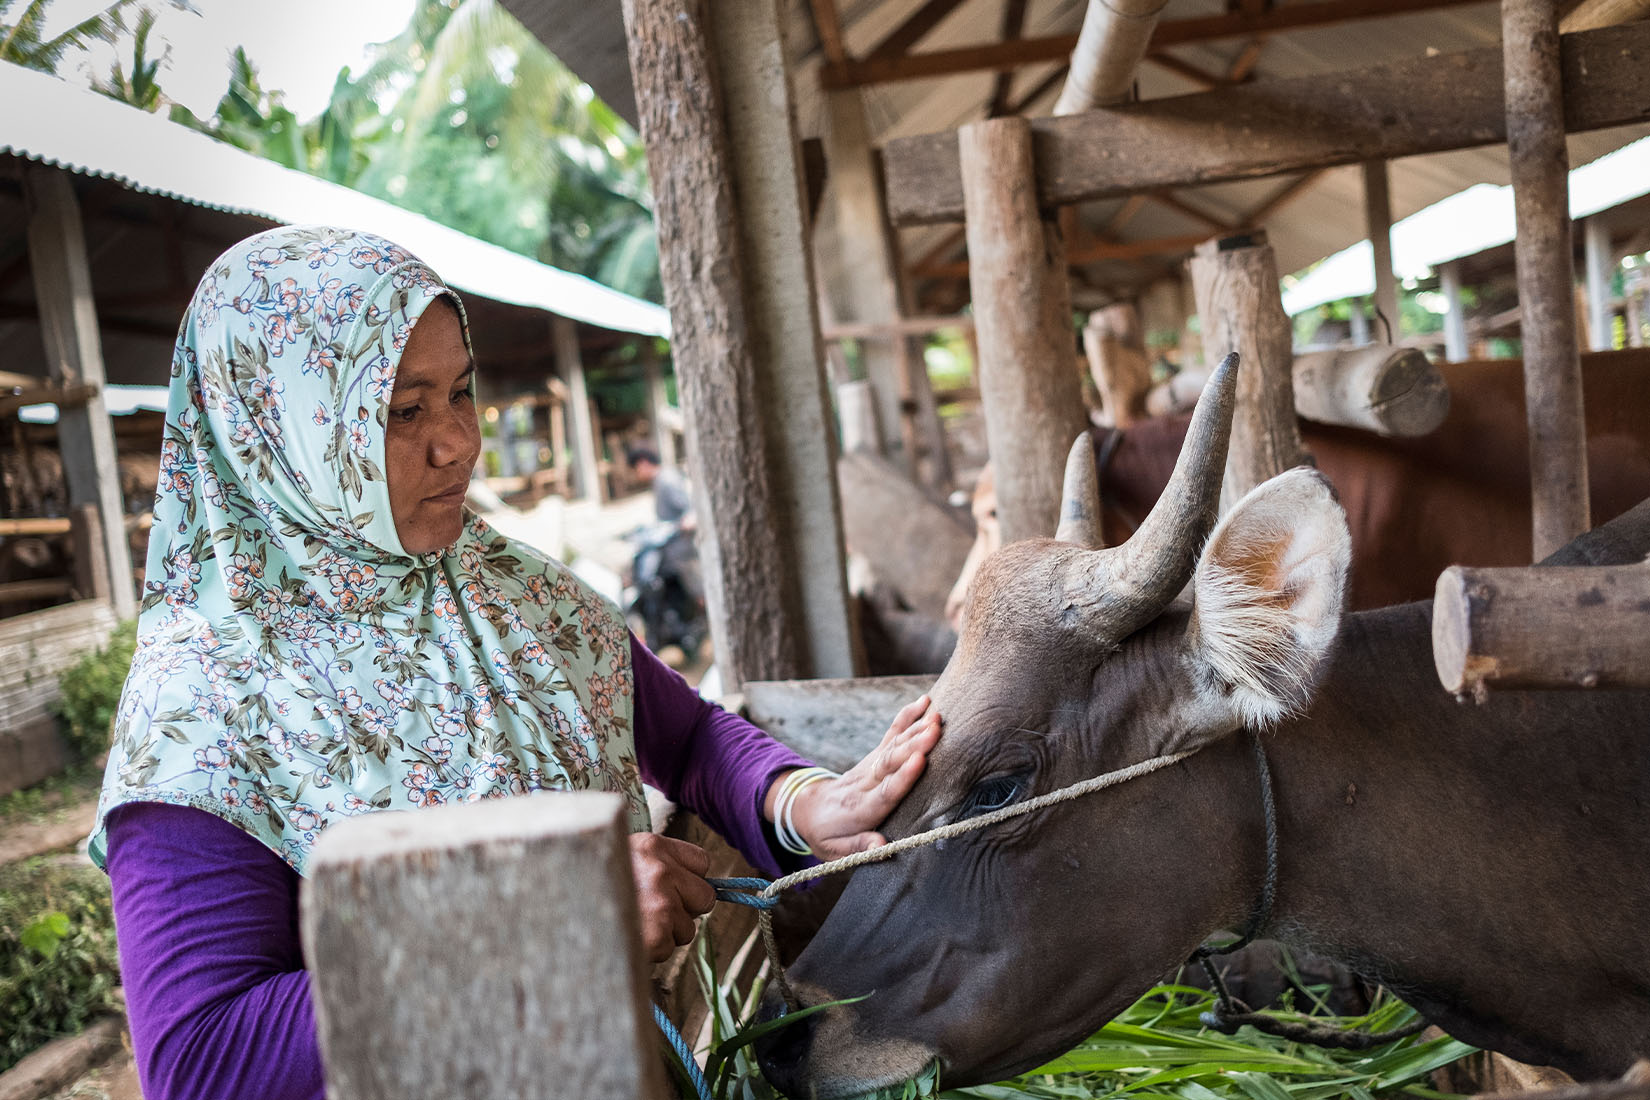 A woman in a floral hijab, patting a brown cow.